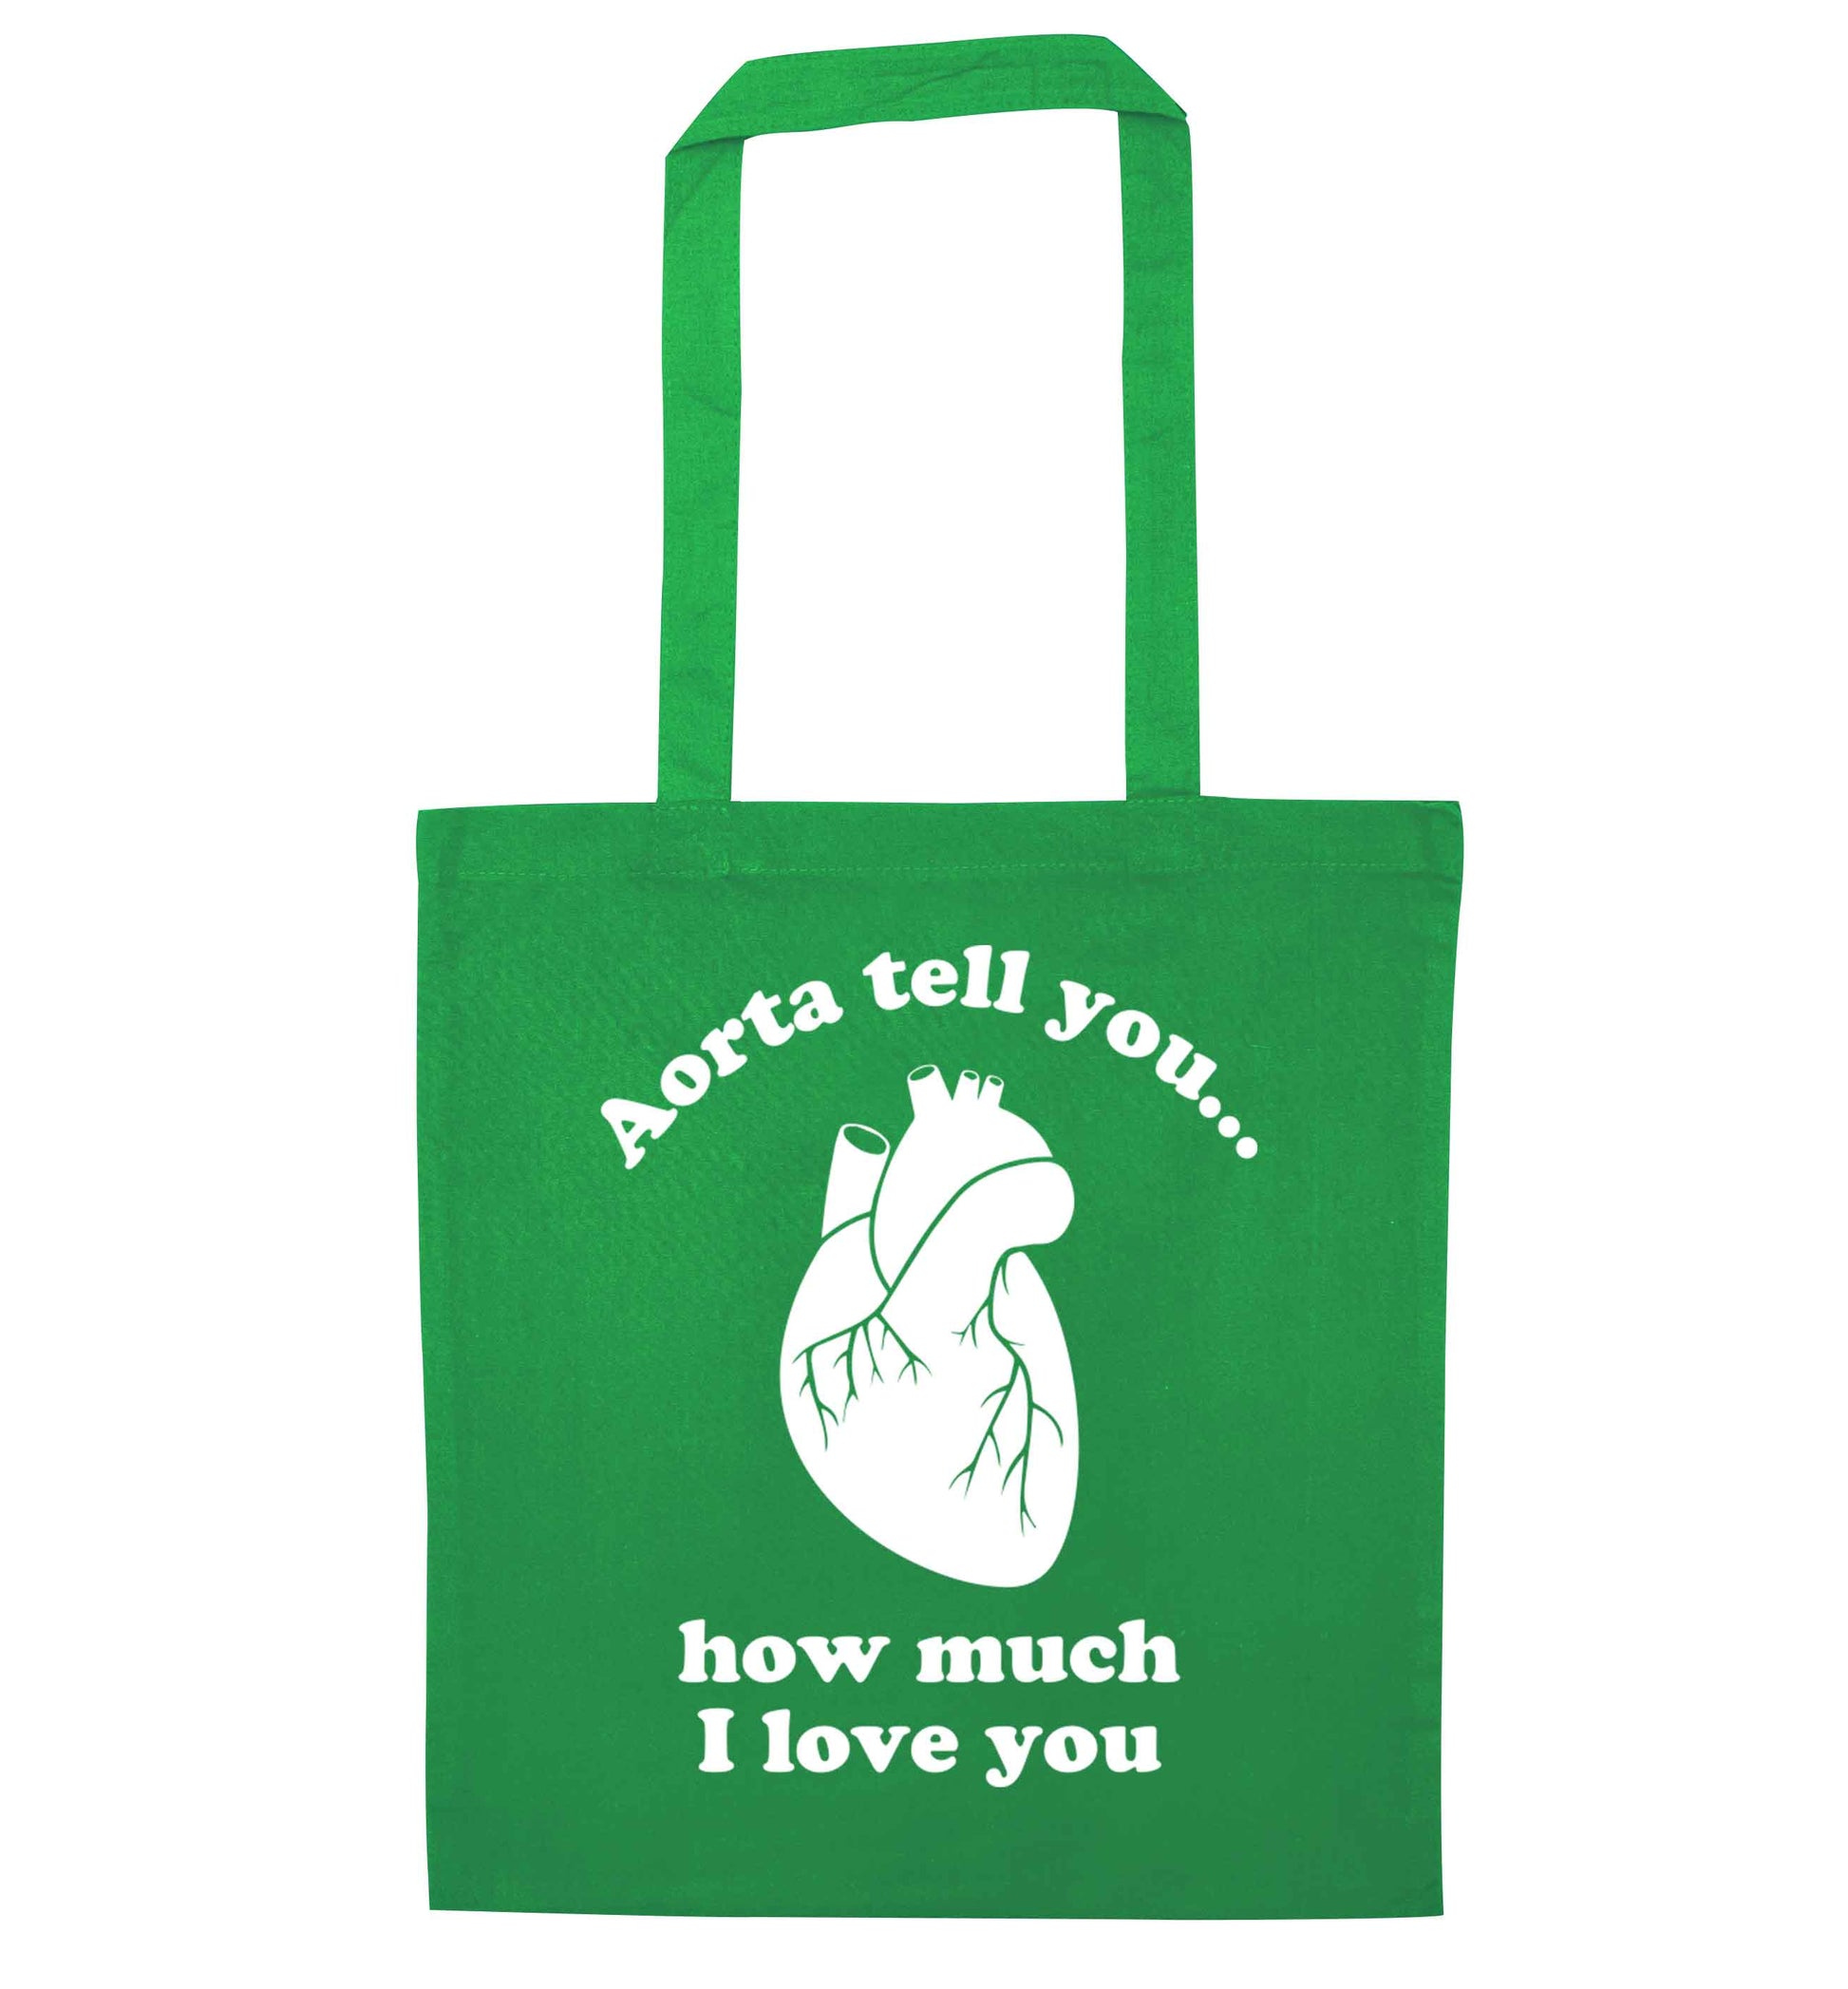 Aorta tell you how much I love you green tote bag